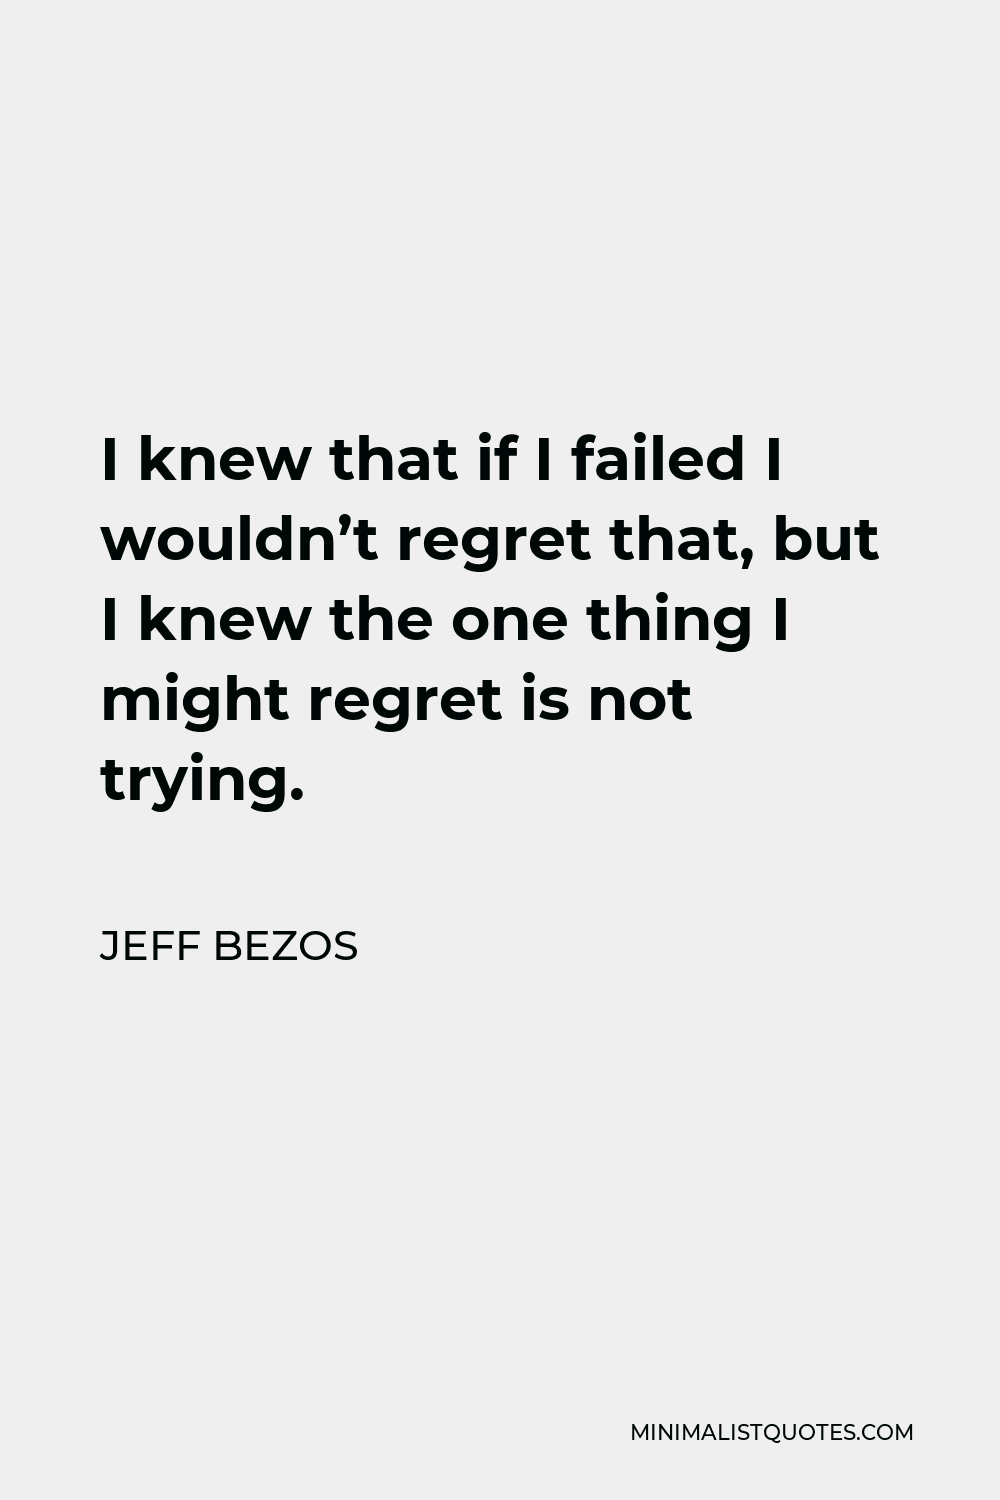 Jeff Bezos Quote - I knew that if I failed I wouldn’t regret that, but I knew the one thing I might regret is not trying.